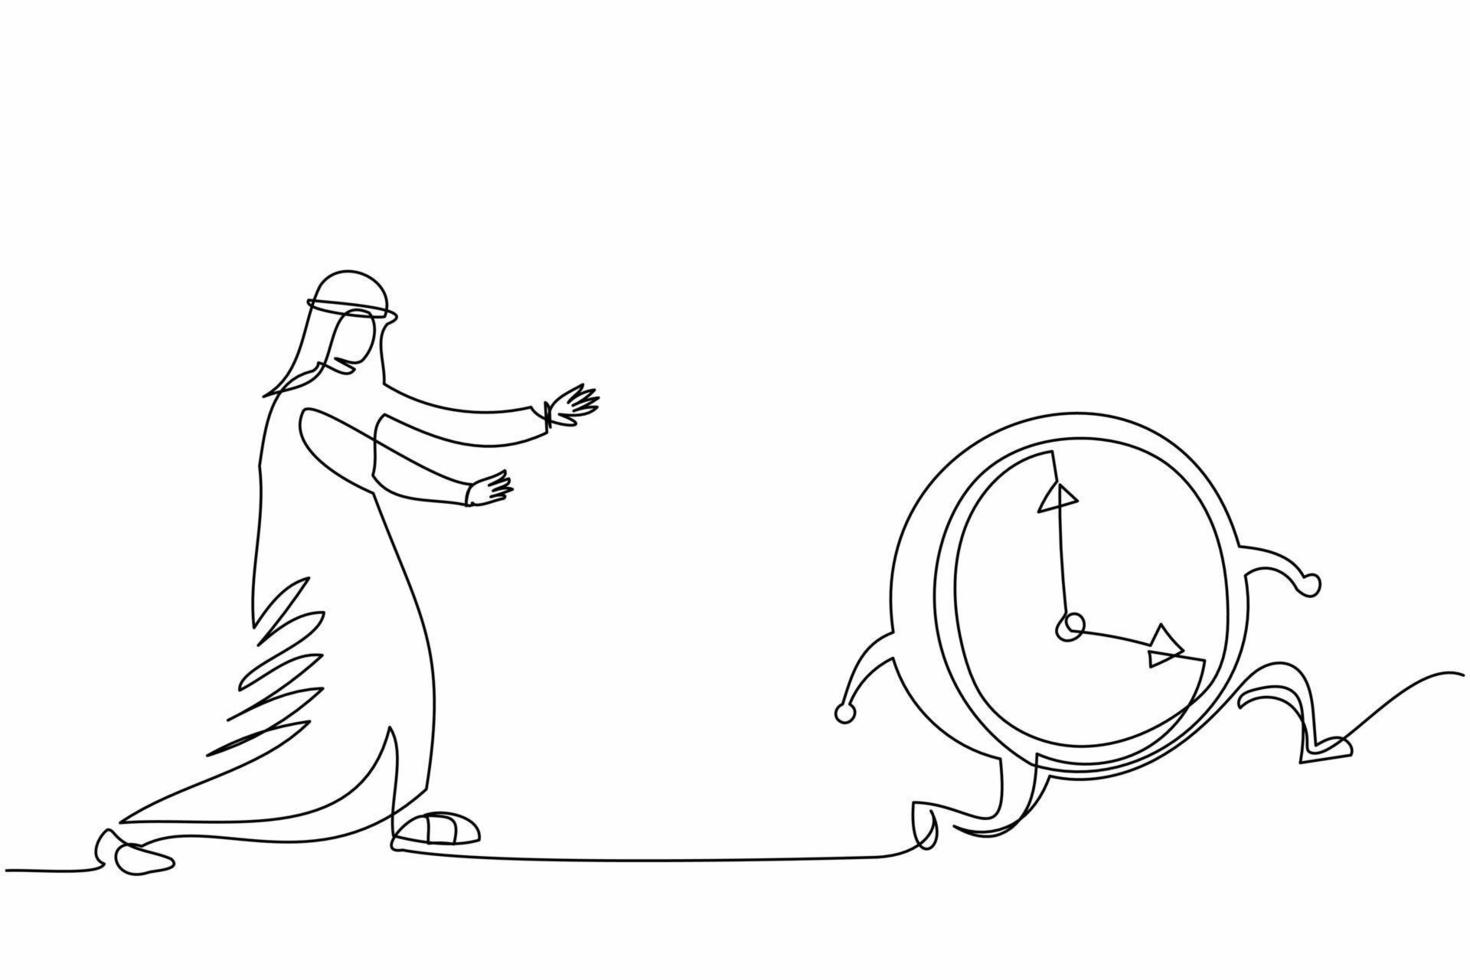 Continuous one line drawing Arab businessman chasing time. Manager runs after clock. Business concept of deadline, time management, fear of being late. Single line design vector graphic illustration